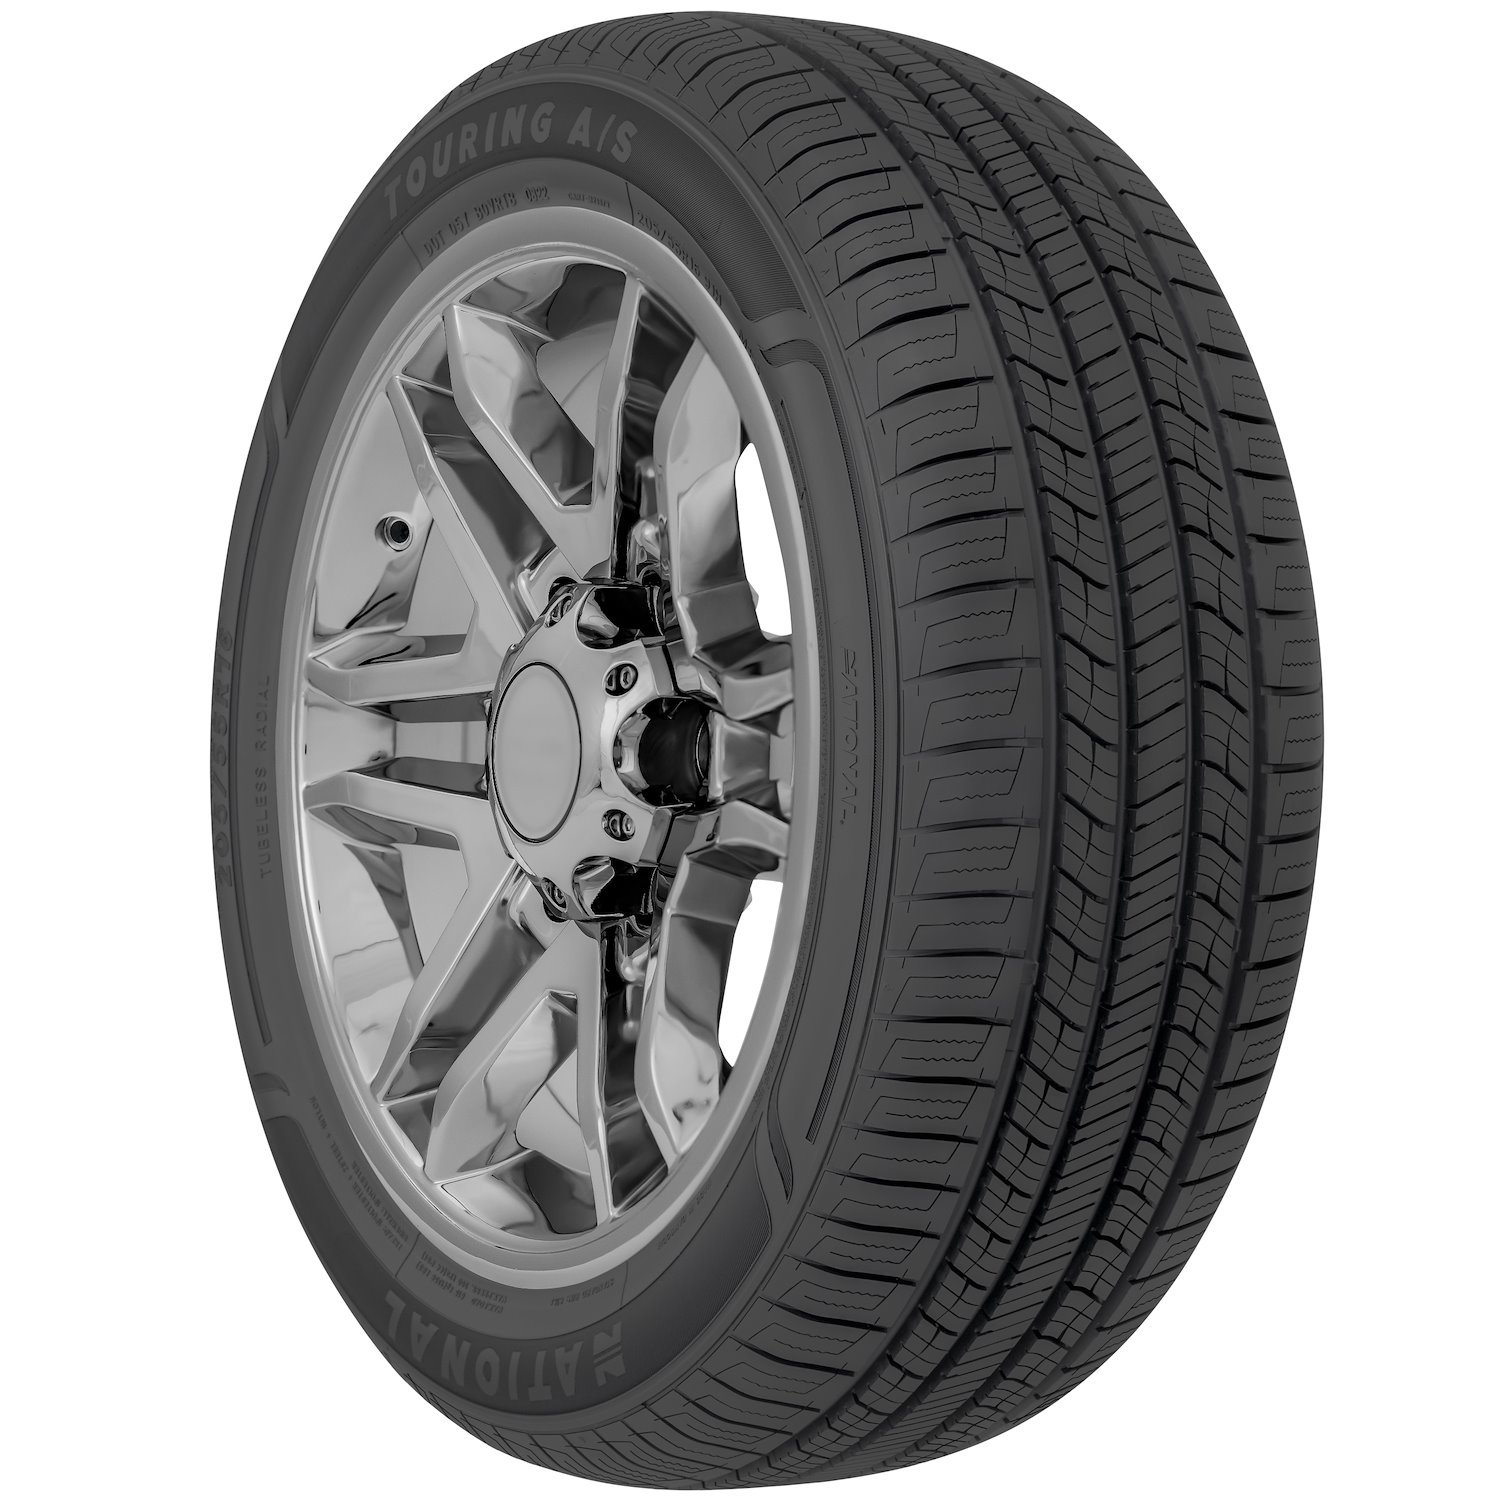 NLR28 Touring A/S Tire, 195/65R15